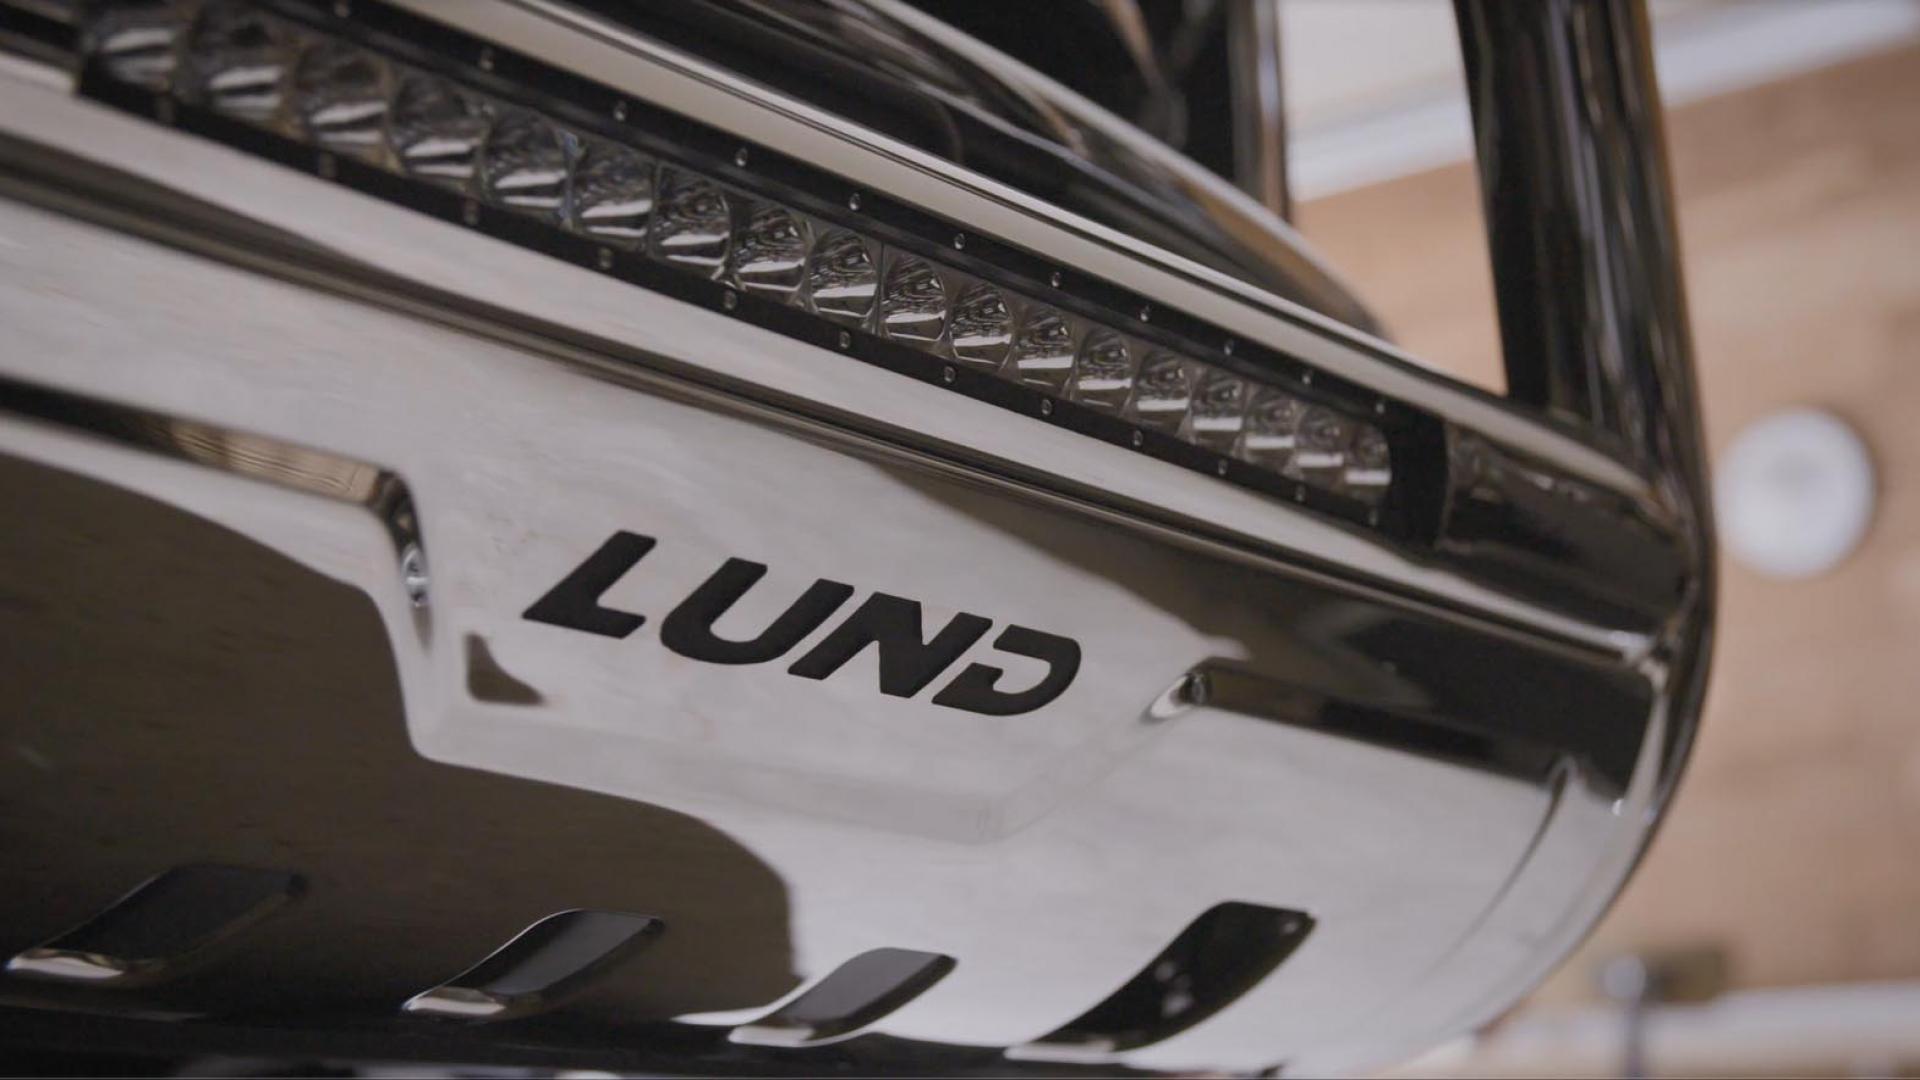 Lund Product Introduction LUND is the first automotive accessory manufacturer to develop and offer comprehensive packages to customize and personalize trucks, SUVs, and vans. An American-based company and the creator of the wrap hood shield category through the invention of the Interceptor® hood shield, LUND® designs and manufactures the most stylish, high performance, and premium automotive accessories for trucks and SUVs.  Product categories include: Interceptor® hood protection, nerf bars, running boards, tonneau covers, exterior accessories, storage boxes, cargo management, and bed accessories.